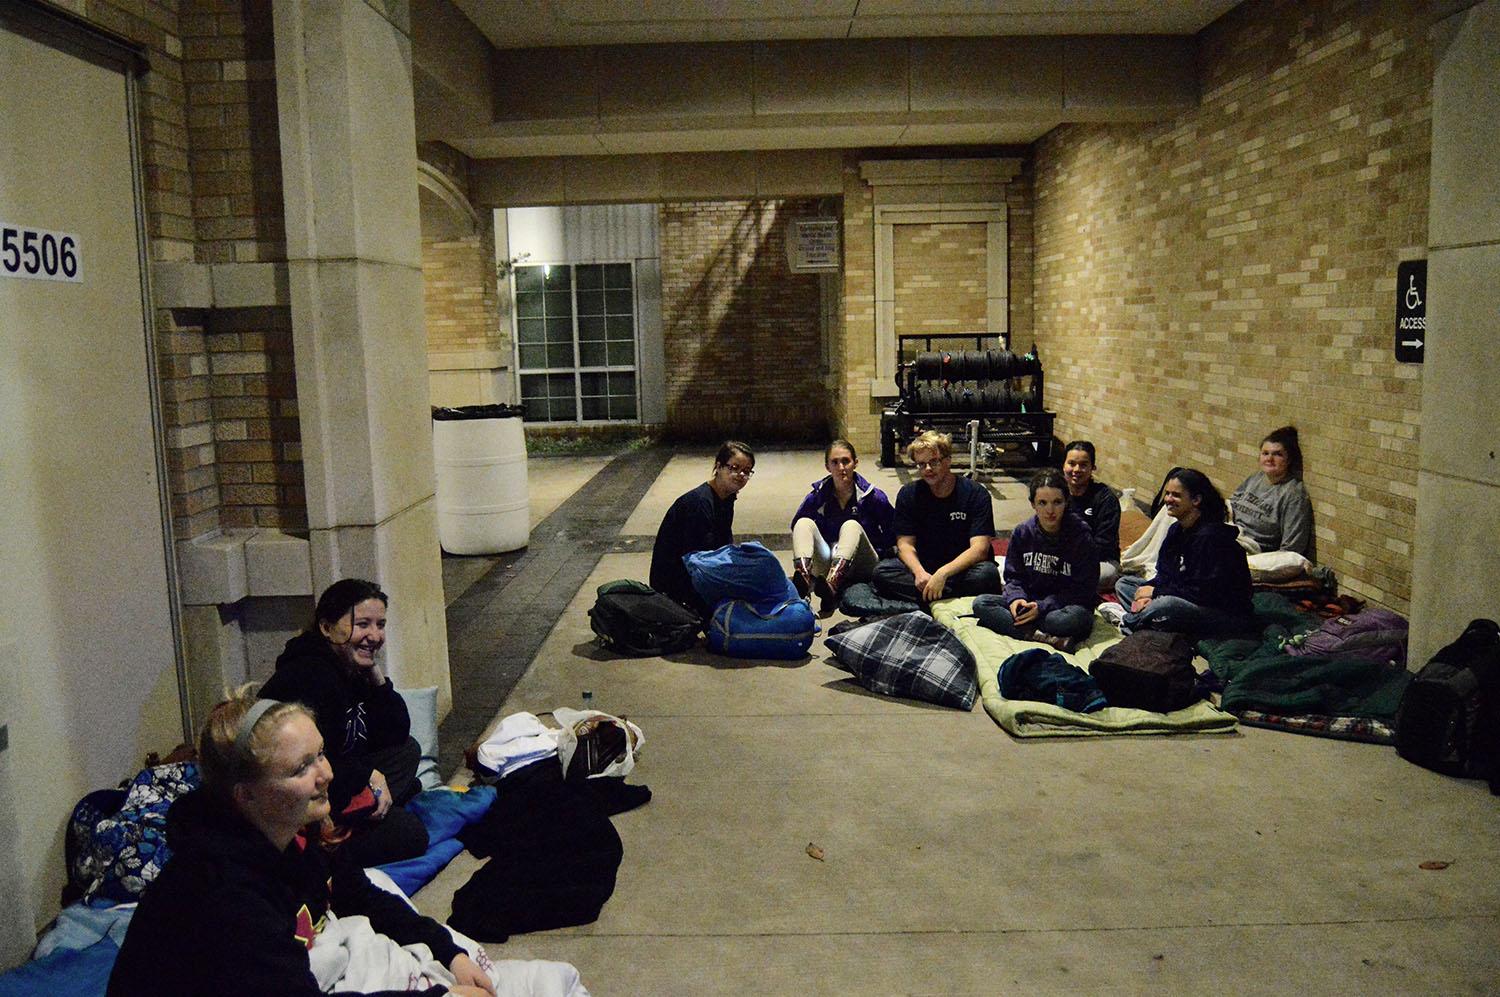 The+TCU+Wesley+Foundation+educates+students+on+campus+during+Homelessness+Awareness+Week.